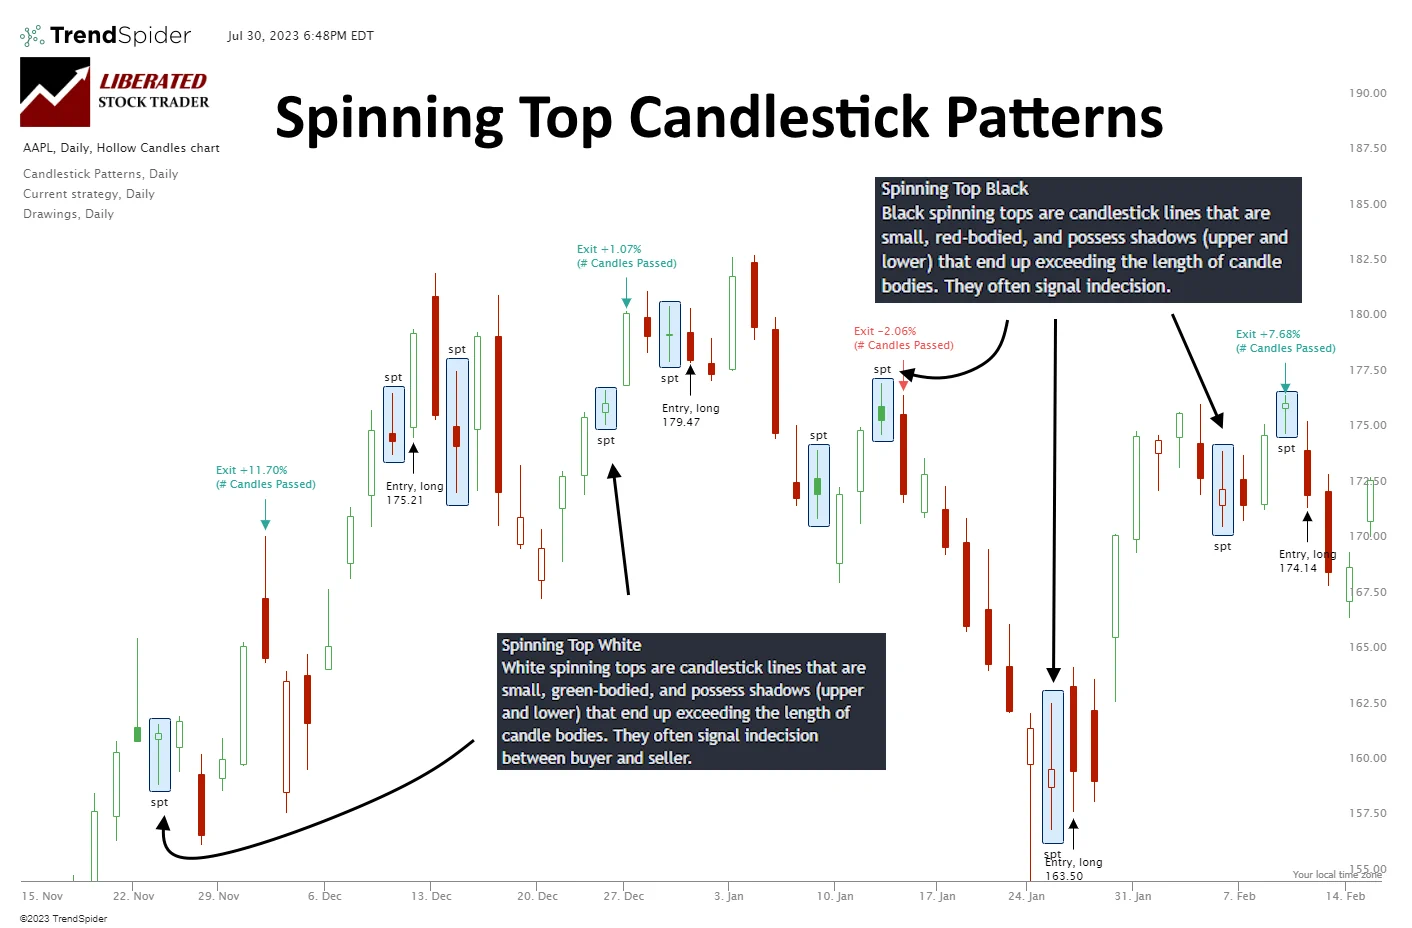 Spinning Top Candlestick Patterns Explained